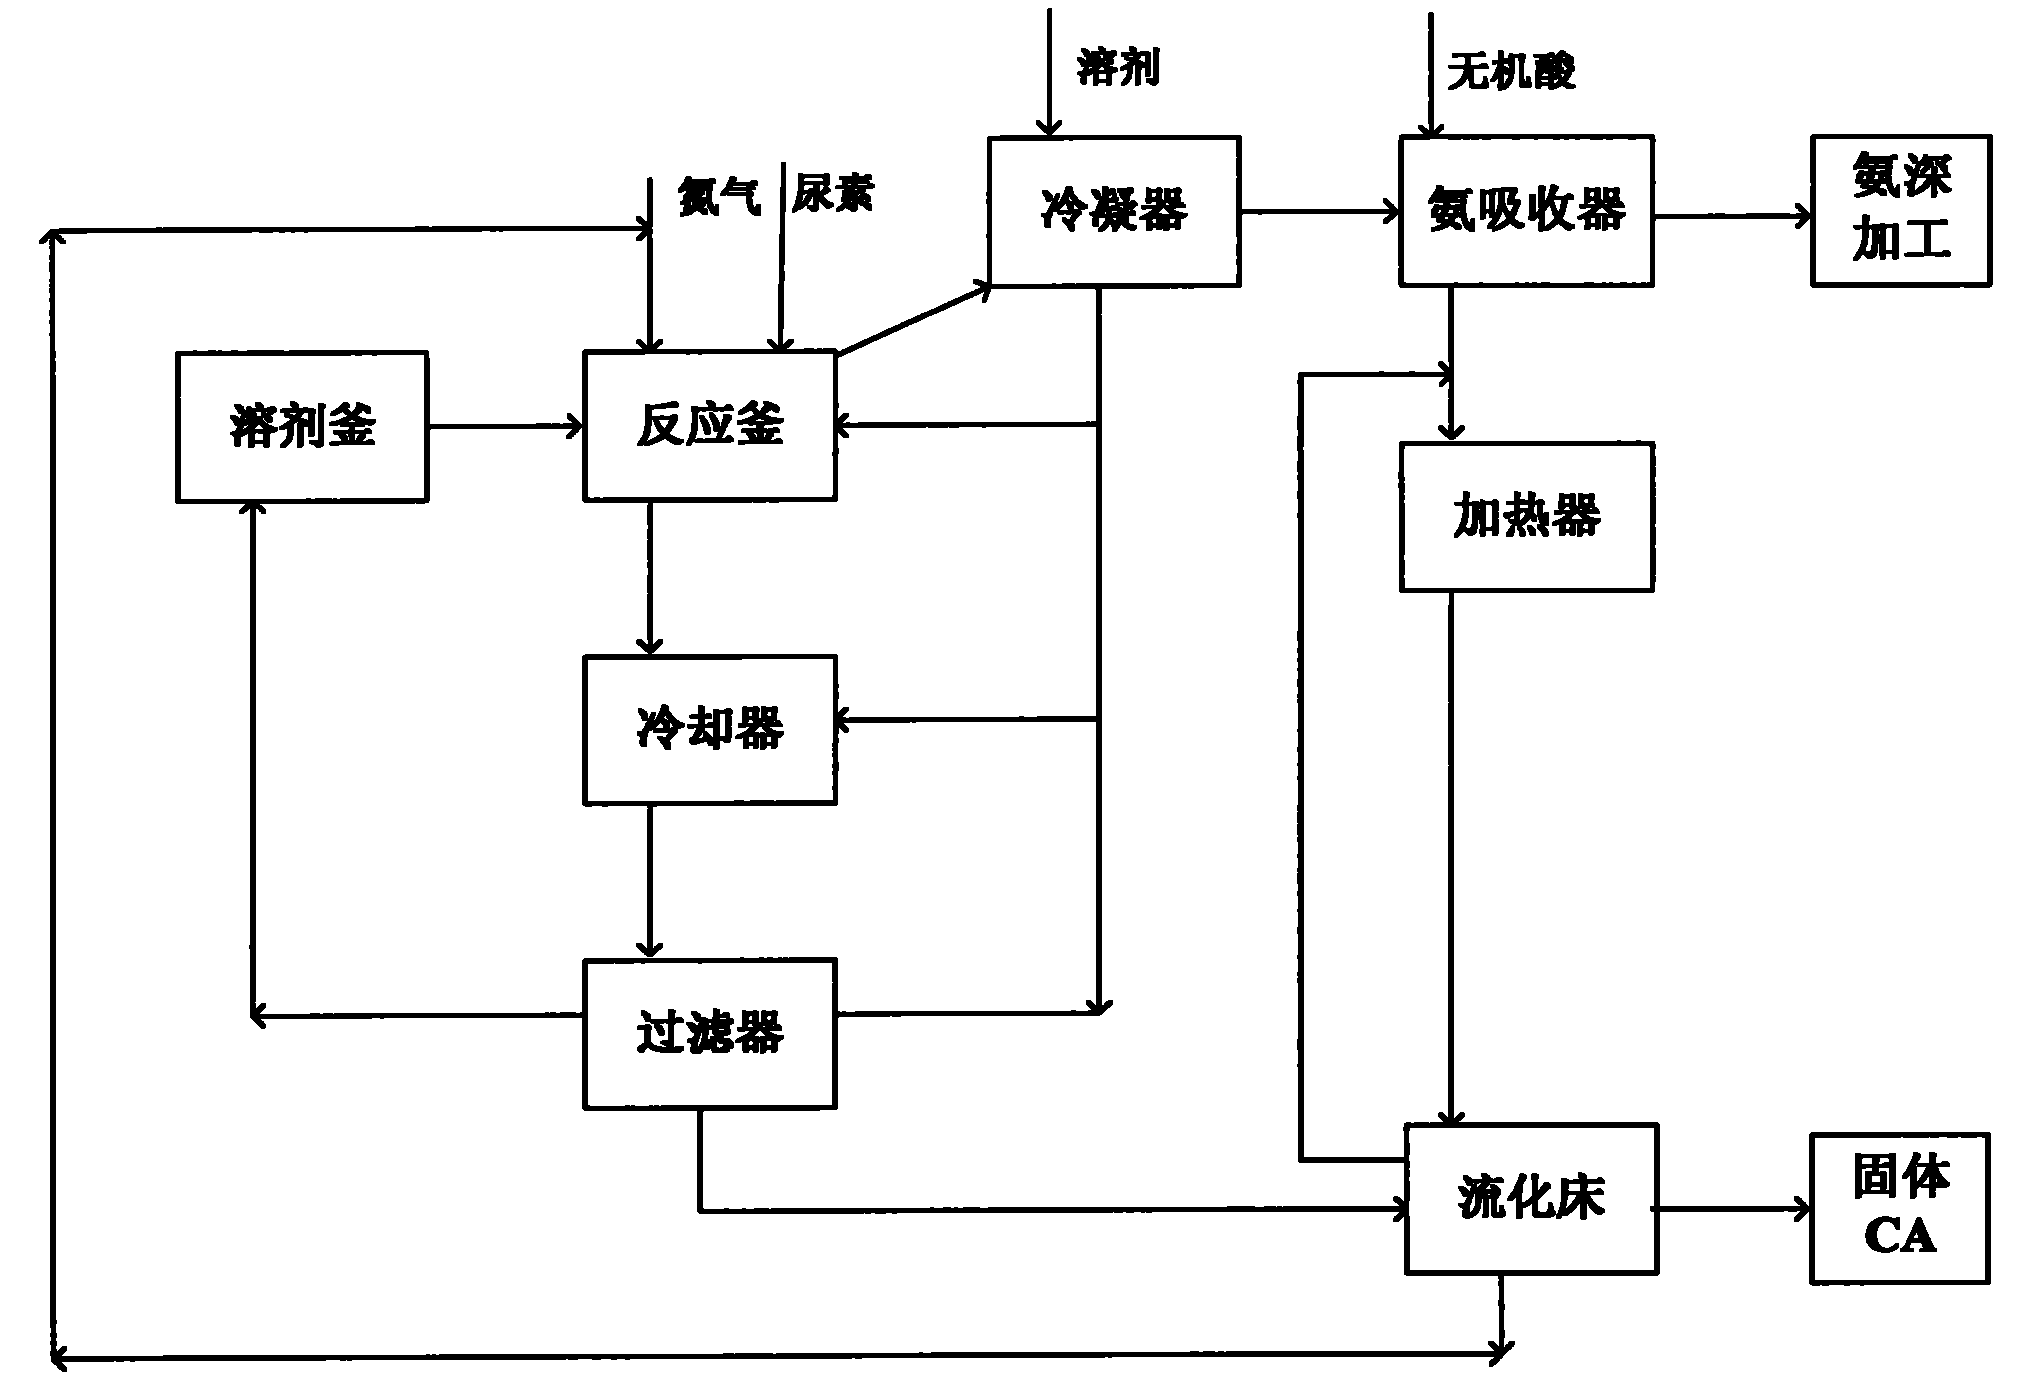 Process for producing white pyruric acid